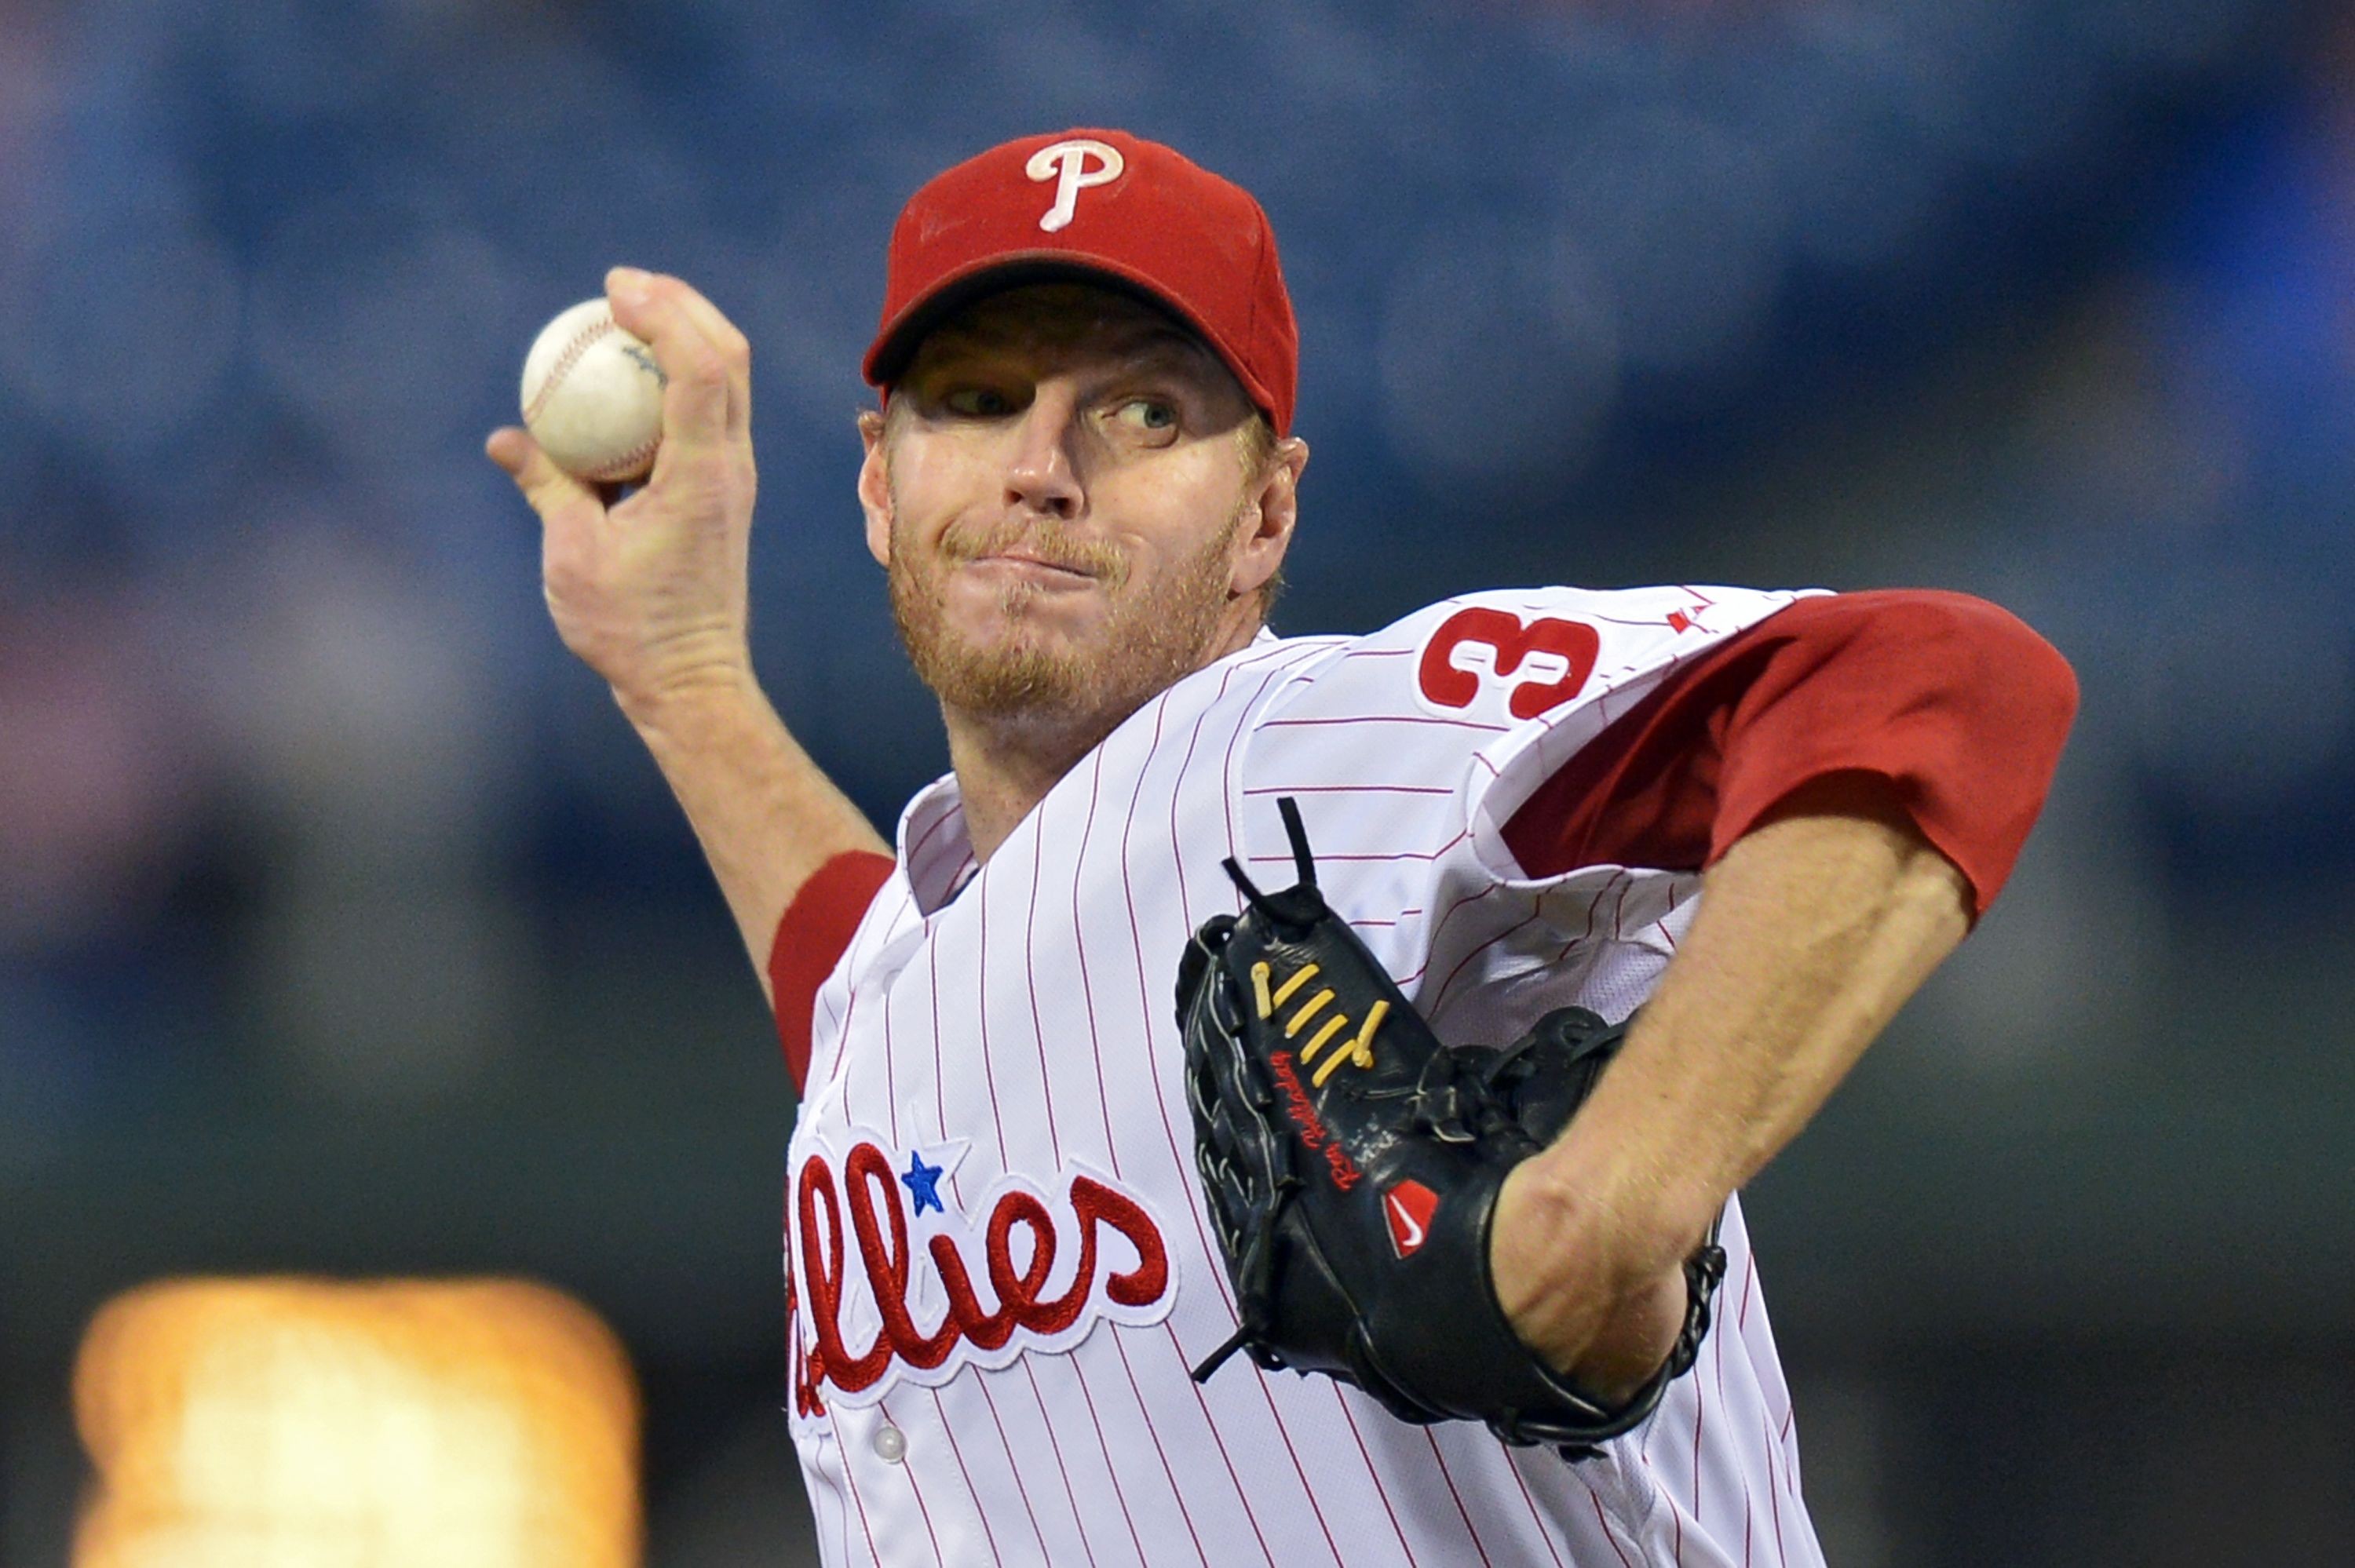 Top five moments of Roy Halladay’s Phillies, Blue Jays career